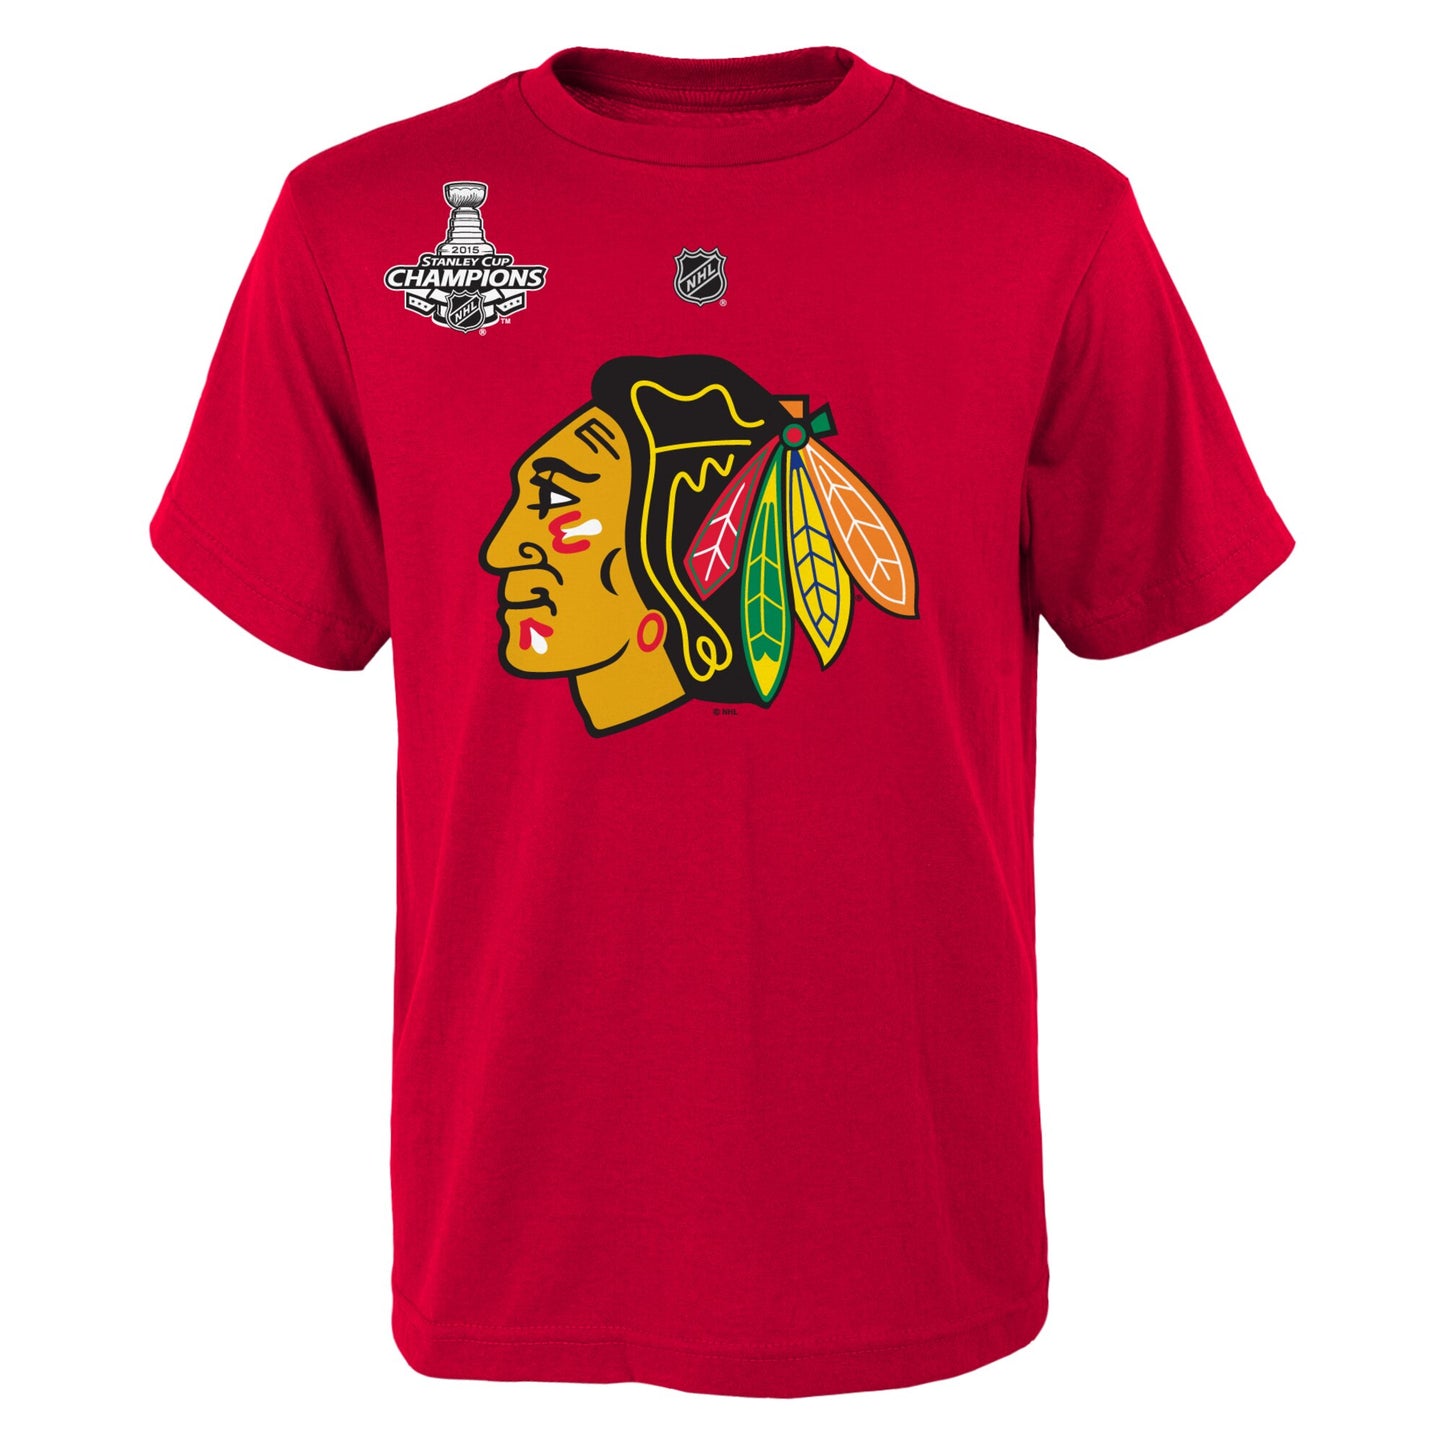 Men's Chicago Blackhawks Jonathan Toews Red Reebok 2015 Stanley Cup Champions Name & Number T-Shirt